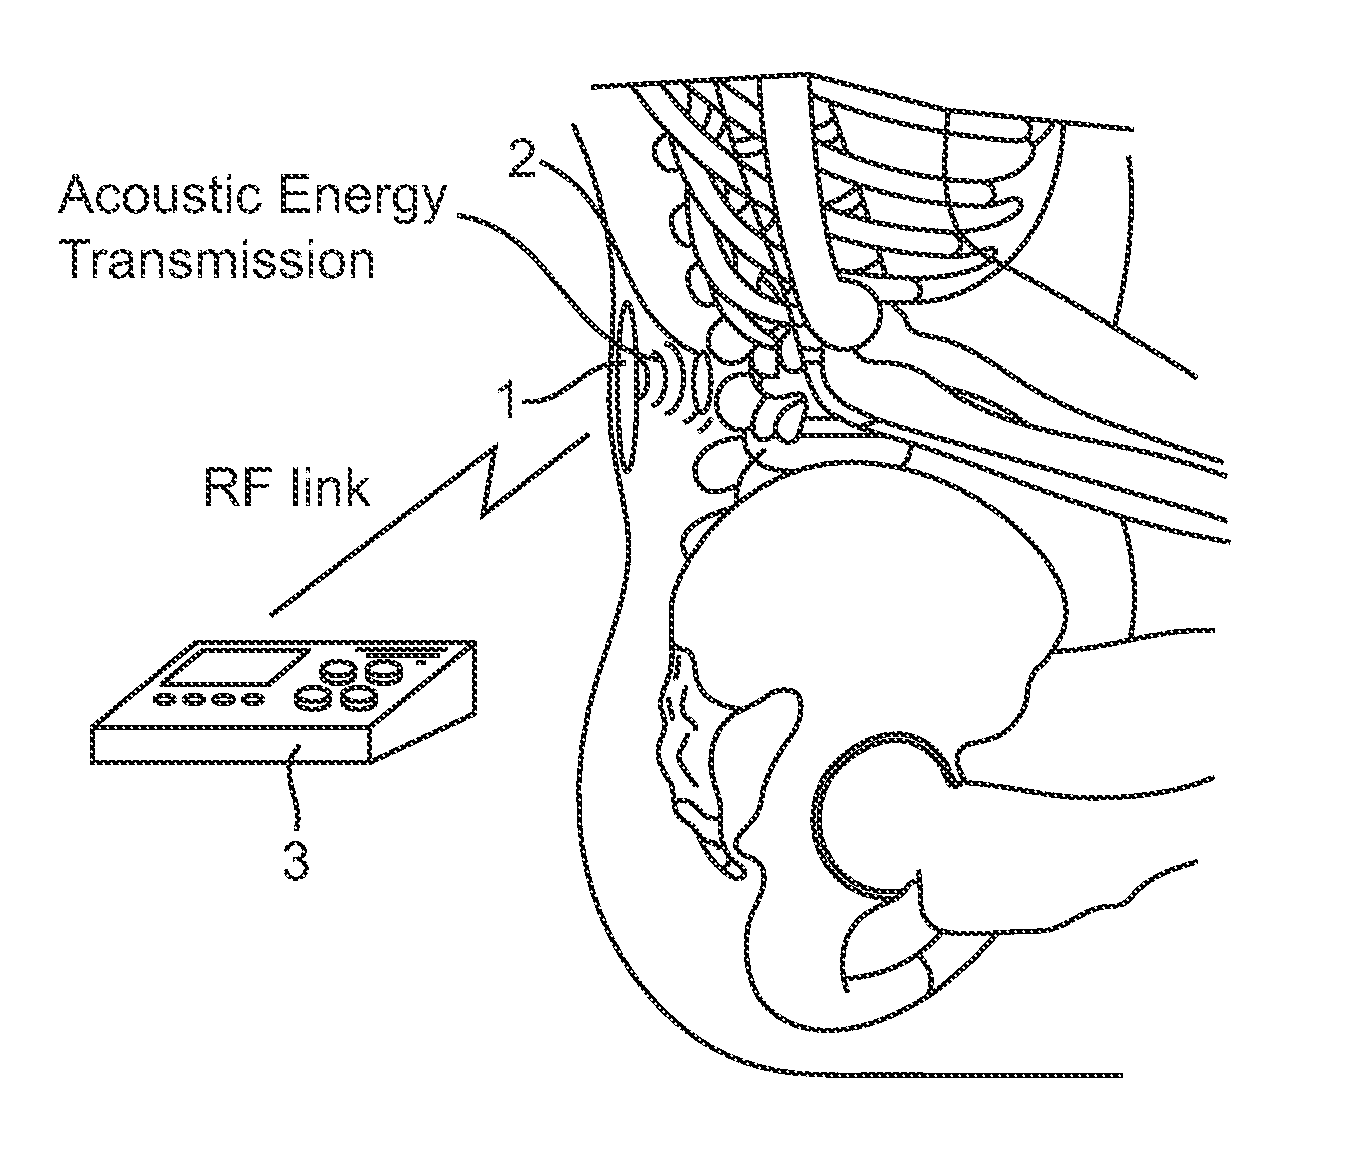 Systems and methods for implantable leadless spine stimulation